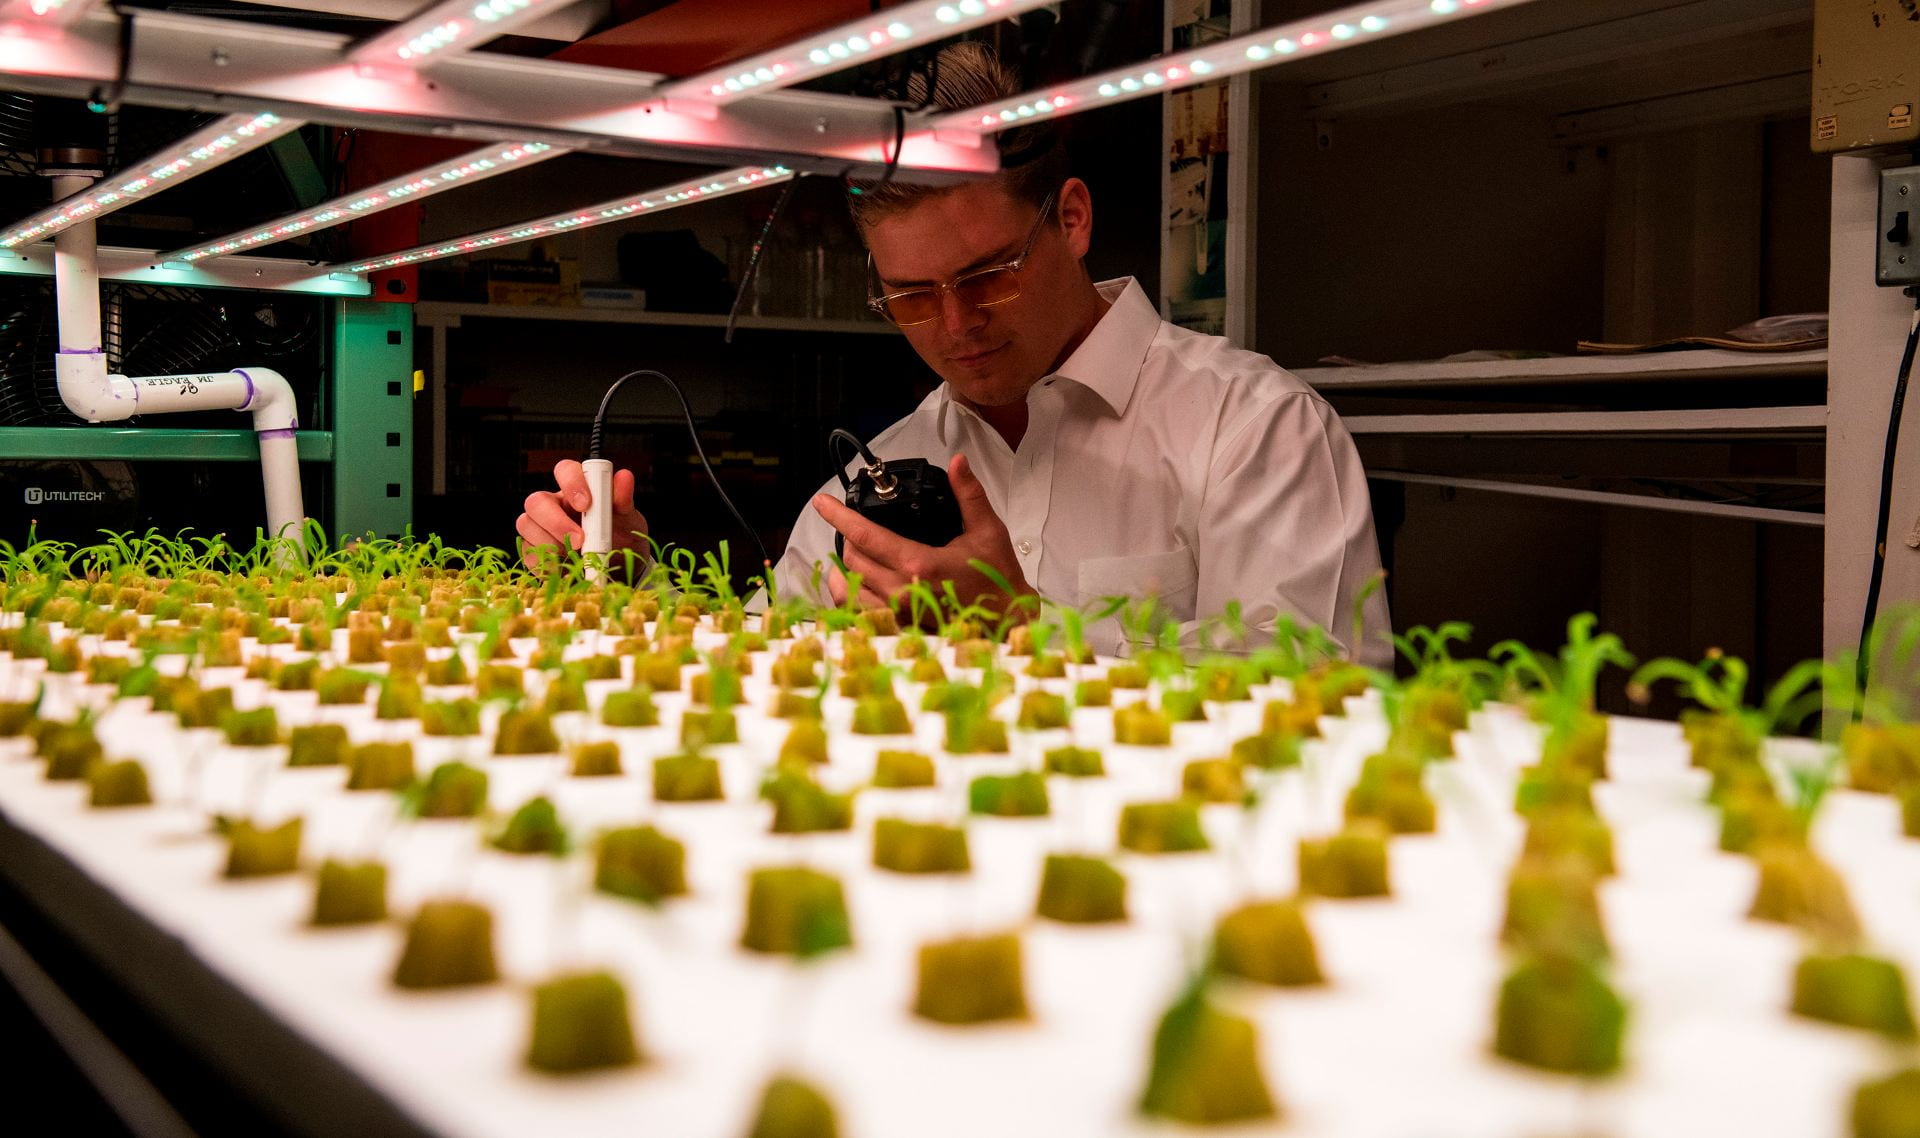 Man wearing glasses and white lab coat uses instrument to test plant seedlings lined in rows on a white vertical farming table.